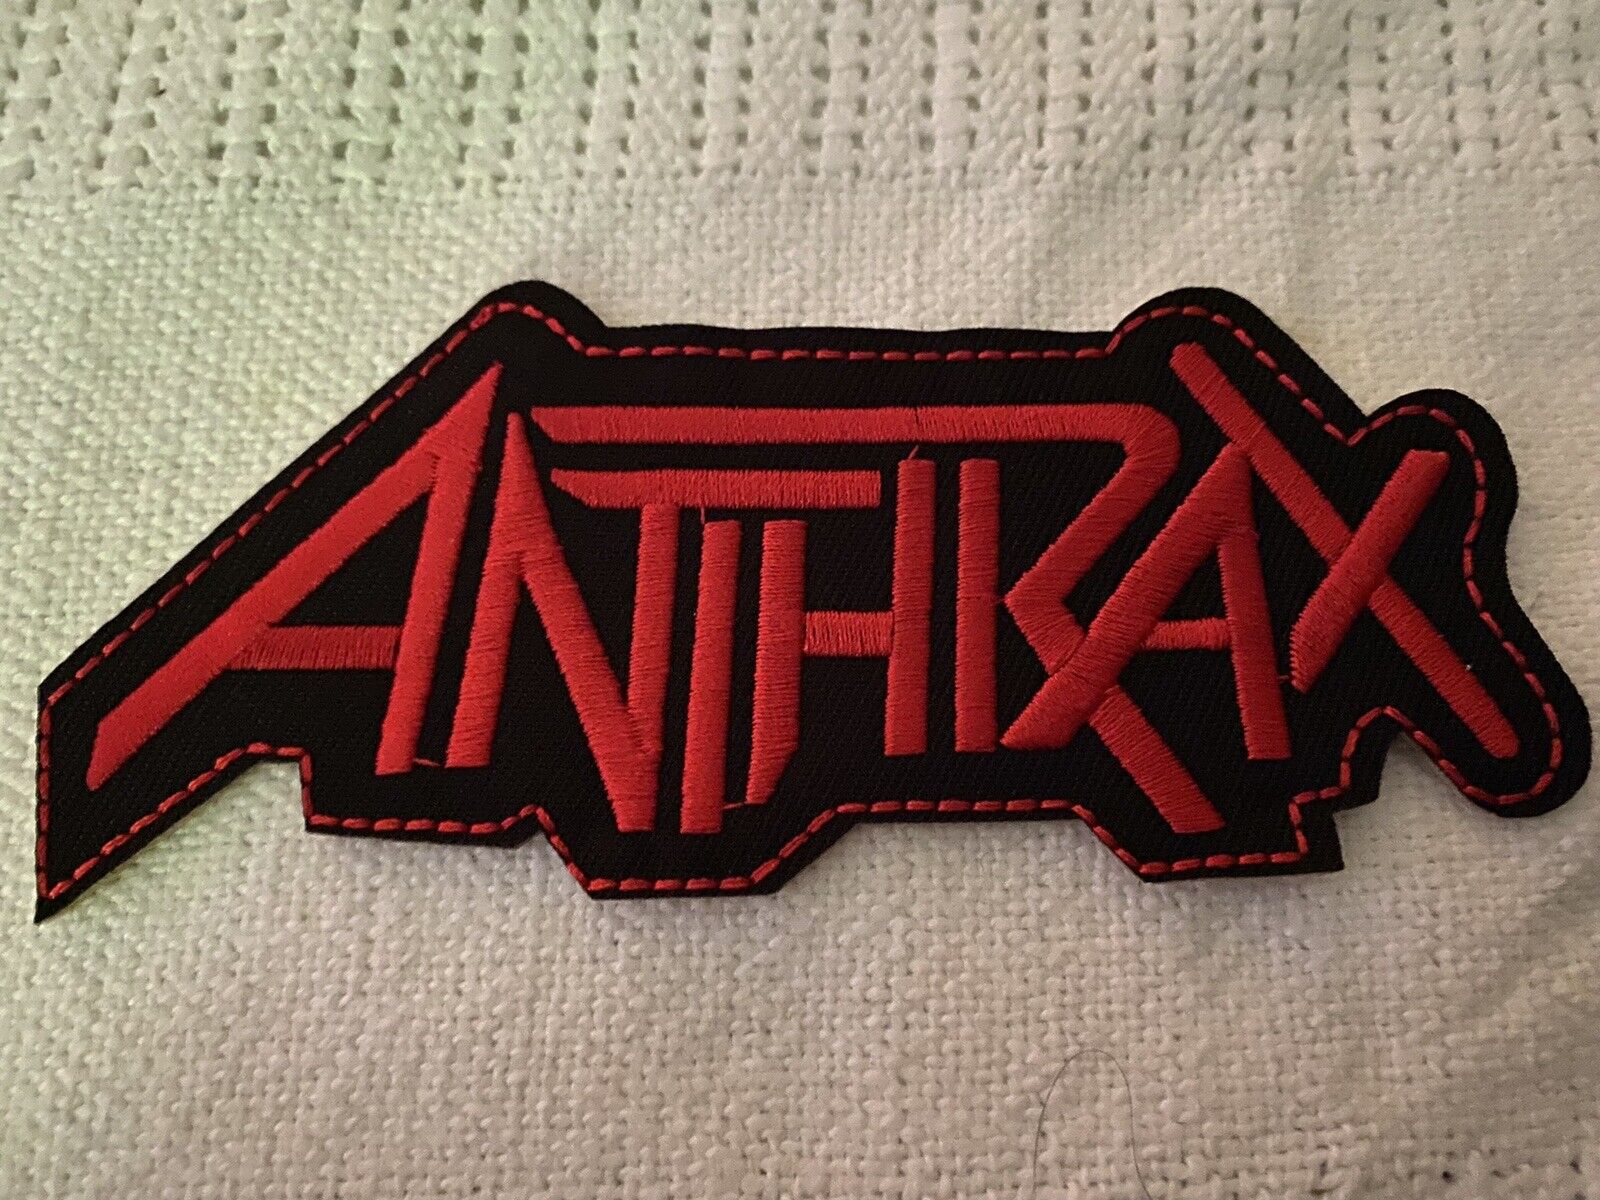 Anthrax (2” X 5”) Patch embroidered, sew, iron,, rock band patch, NEW